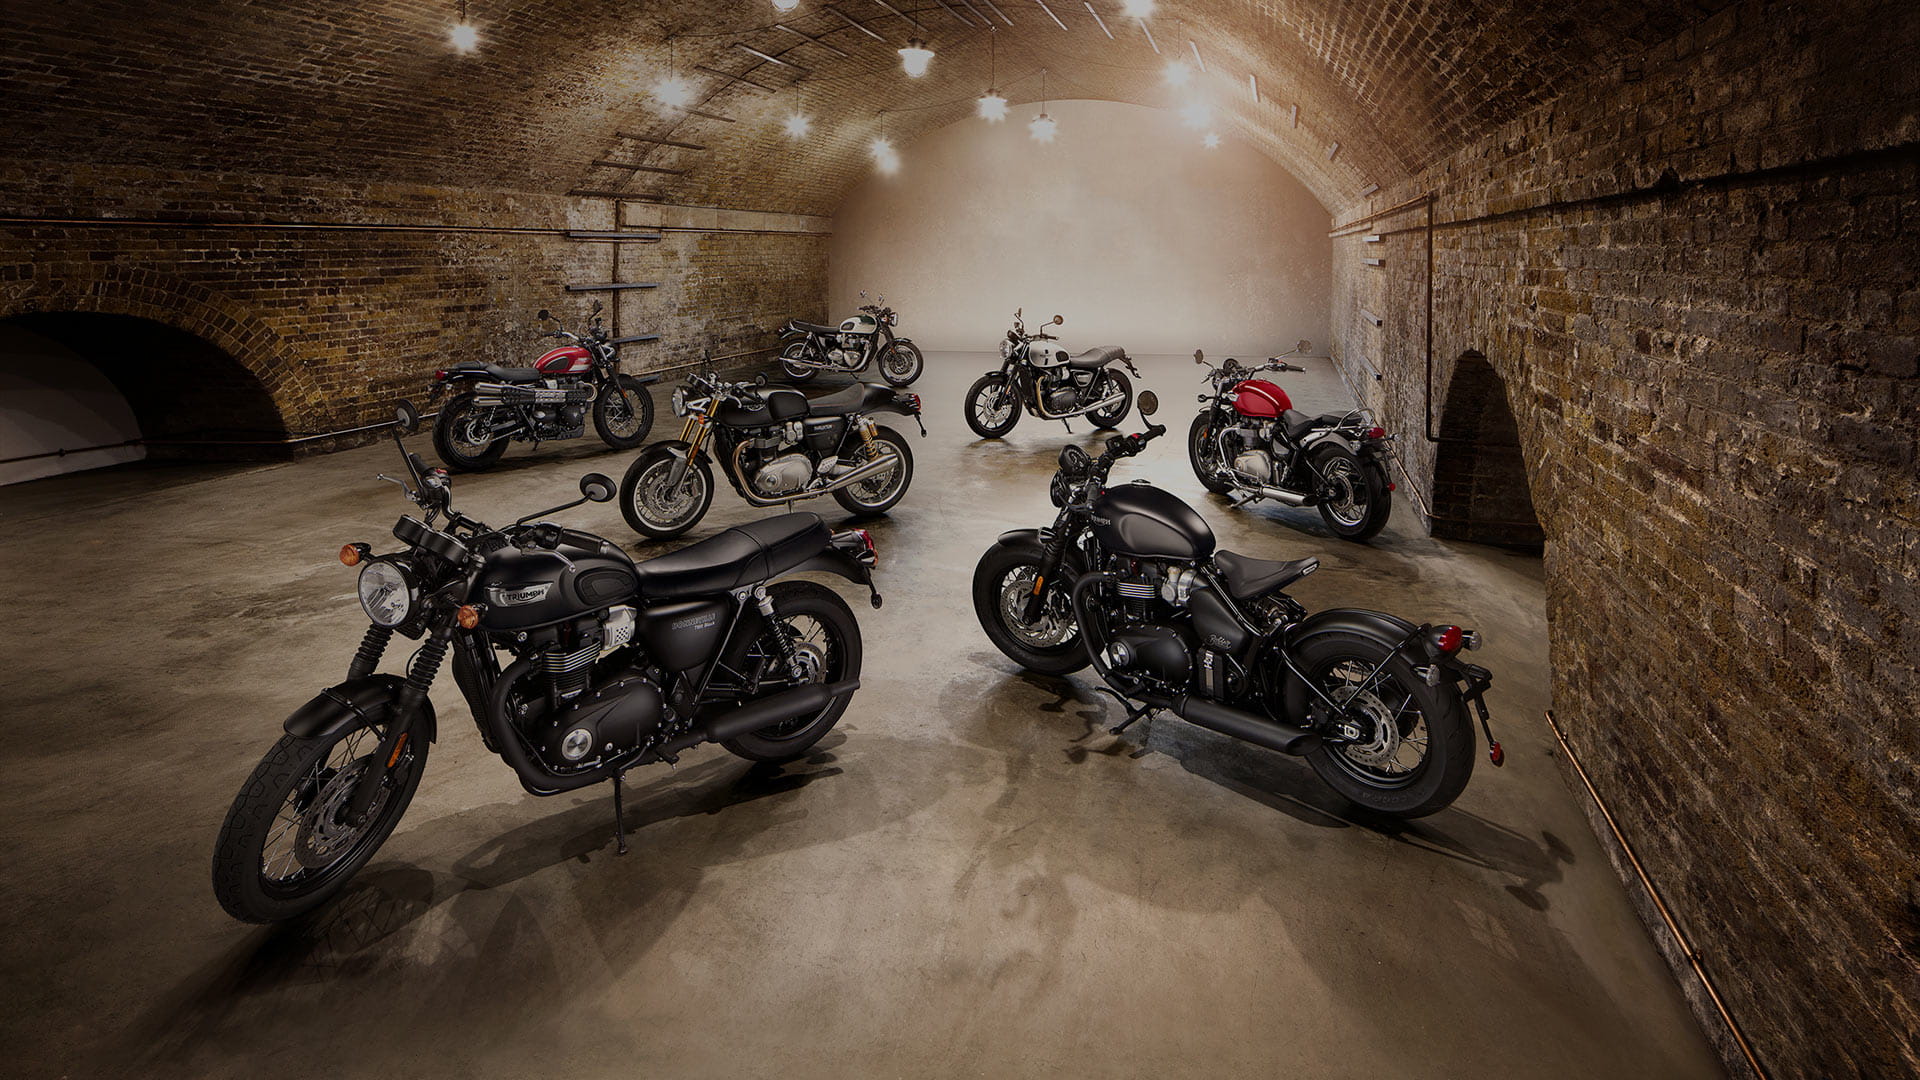 IV. The iconic models of Triumph Motorcycles: A showcase of timeless style and performance